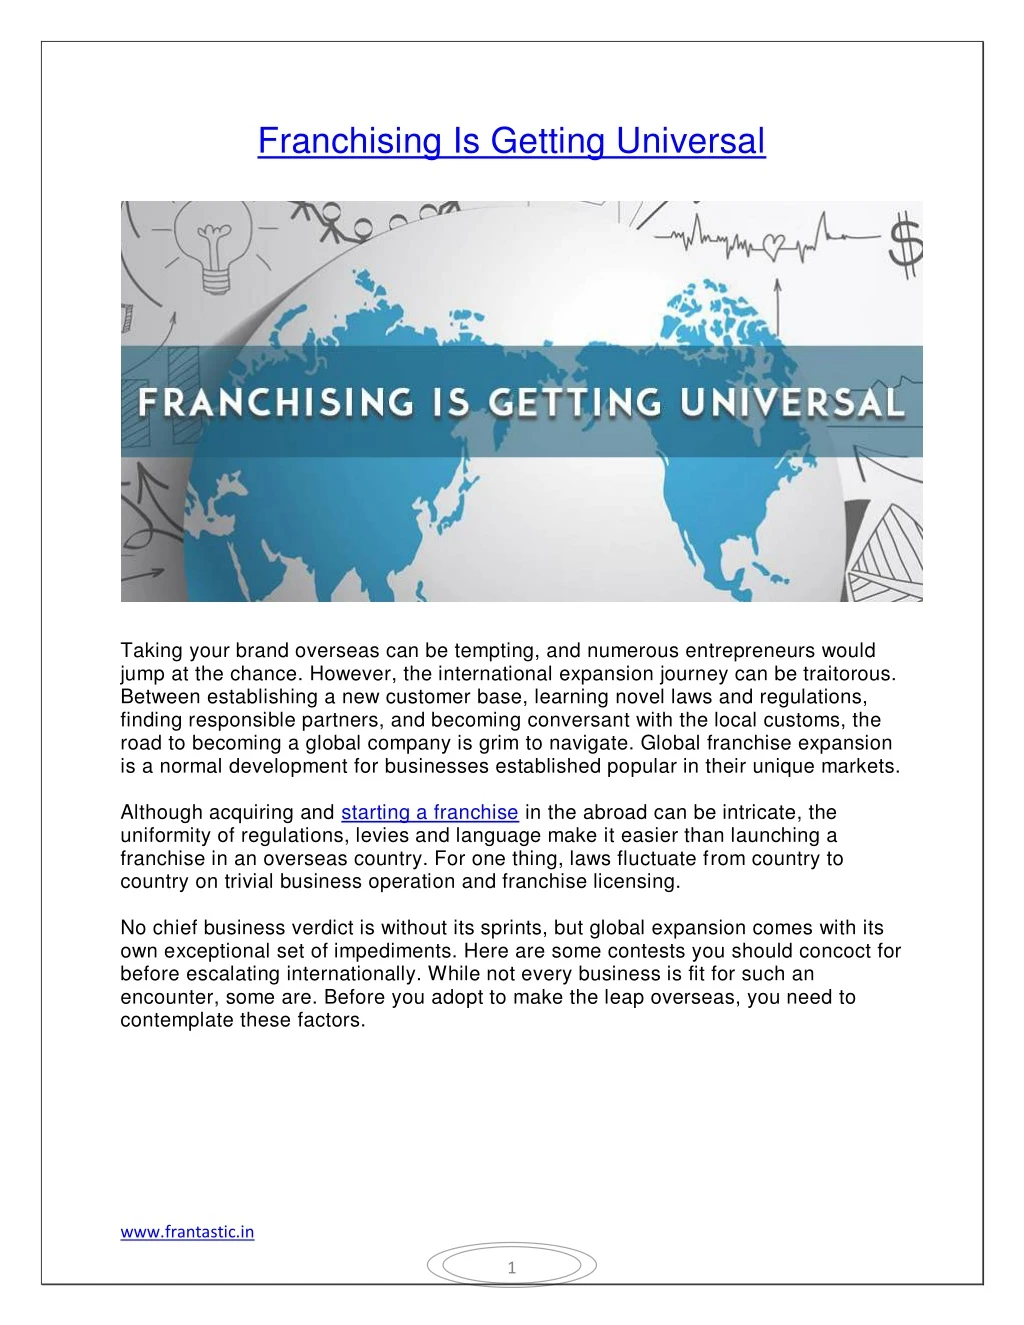 franchising is getting universal